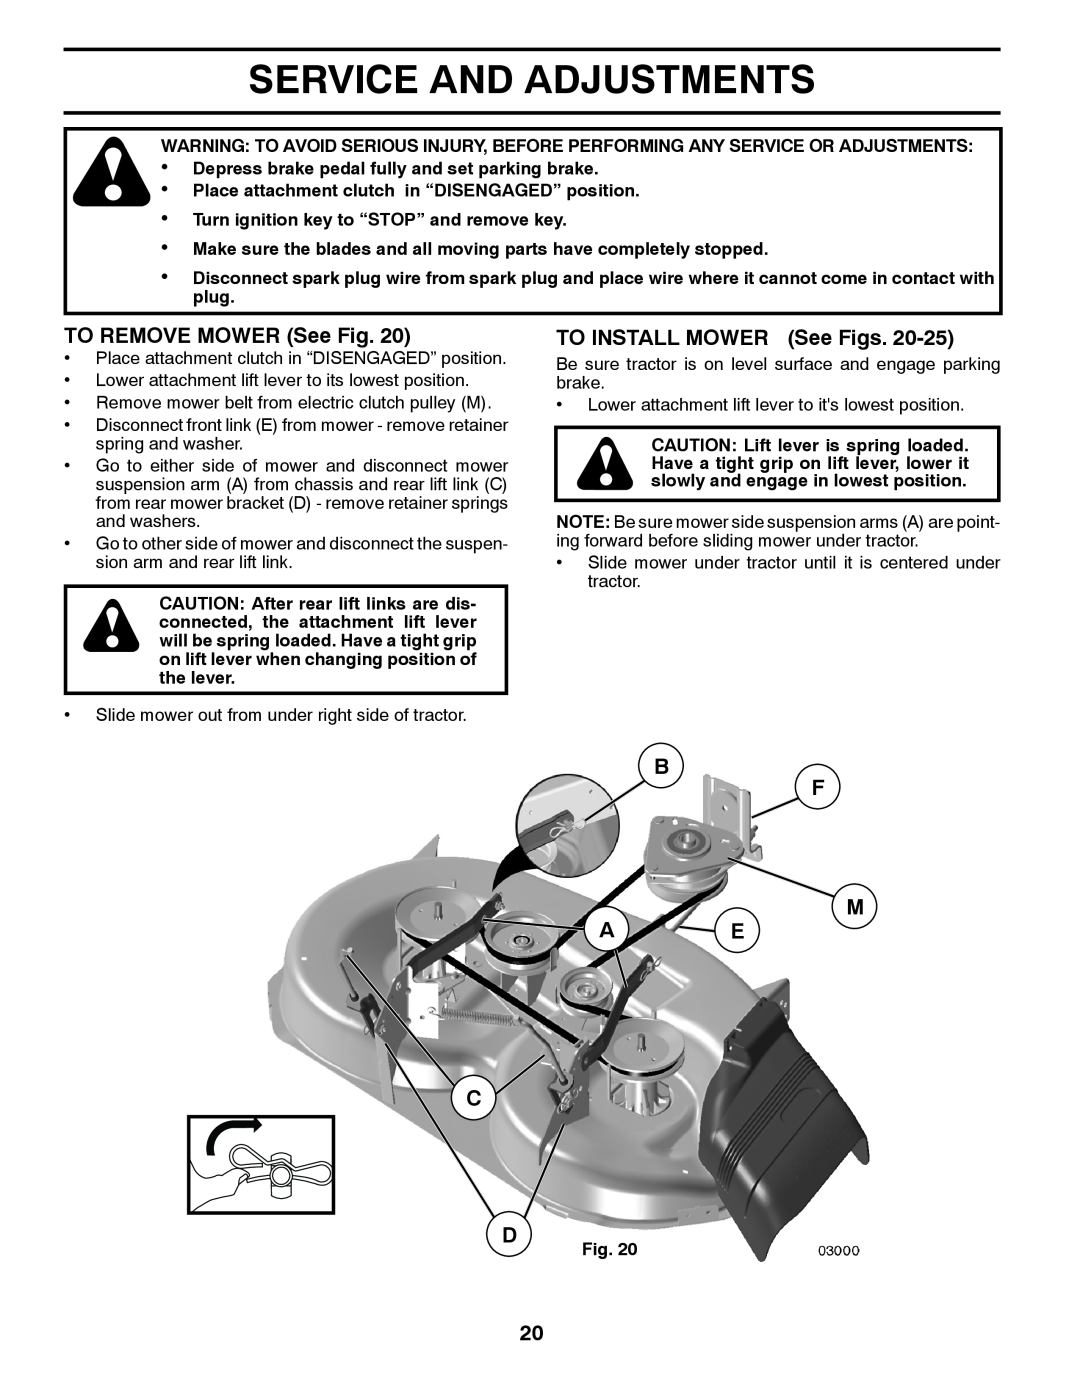 Jonsered LT2218A manual Service And Adjustments, TO REMOVE MOWER See Fig, TO INSTALL MOWER See Figs, B F M A E C 